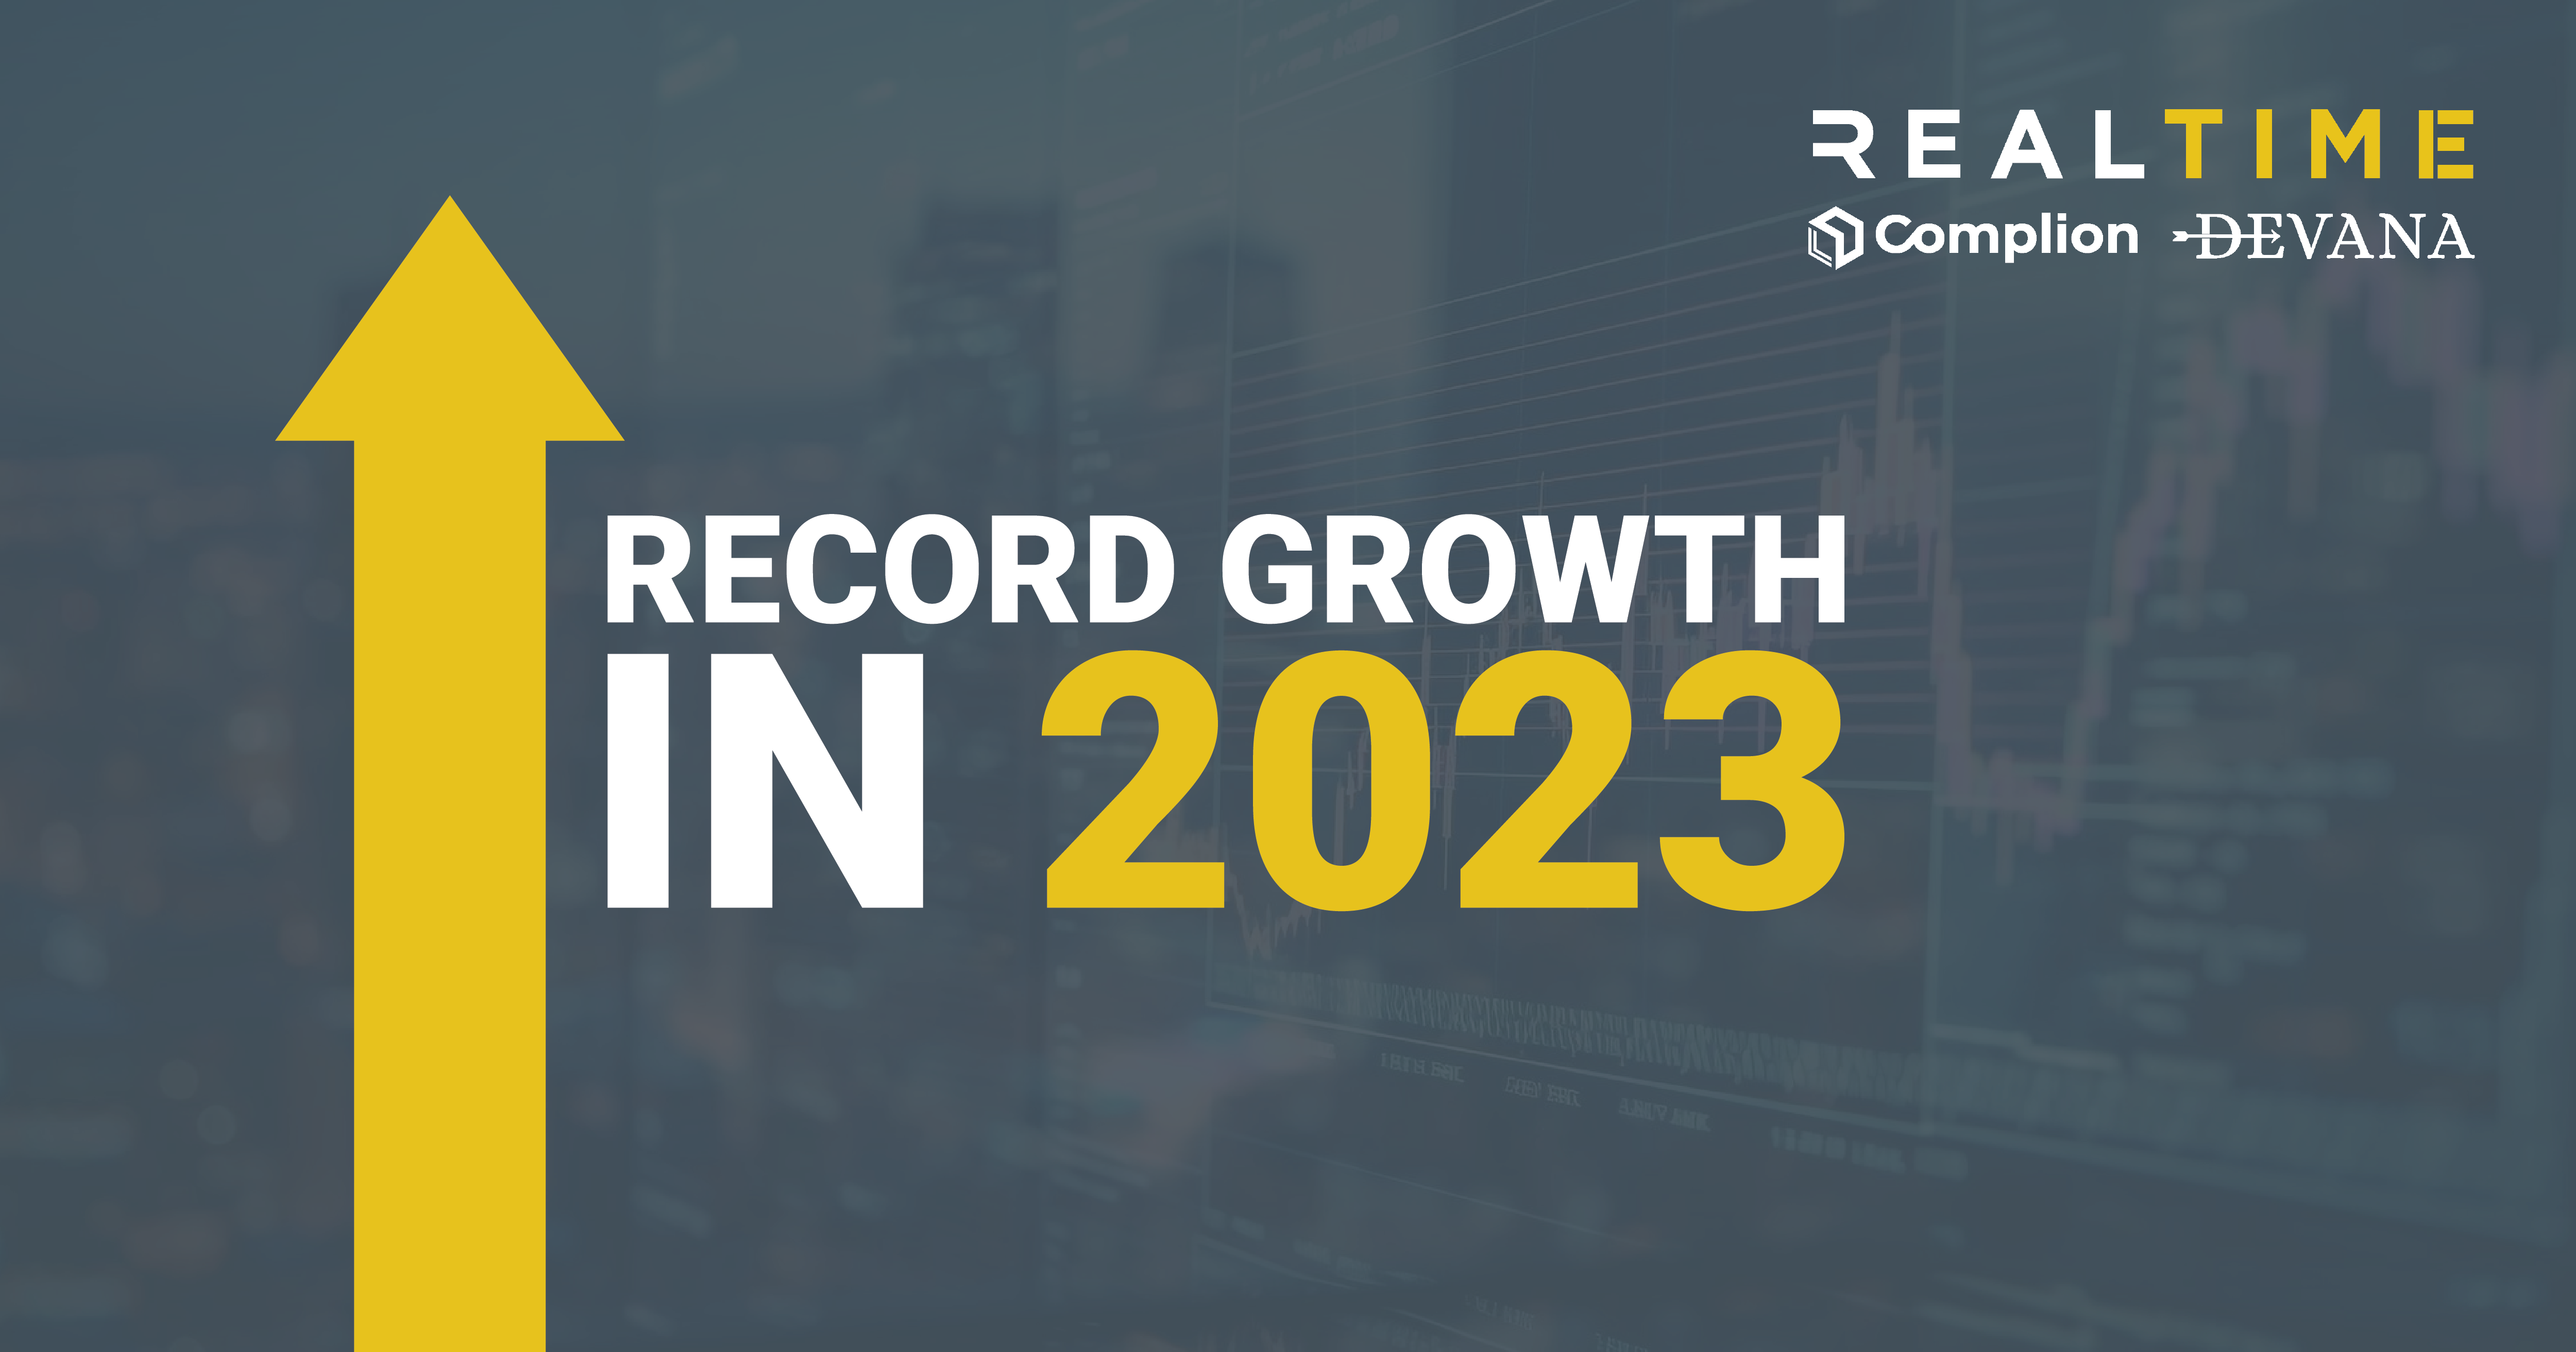 RealTime reports record growth